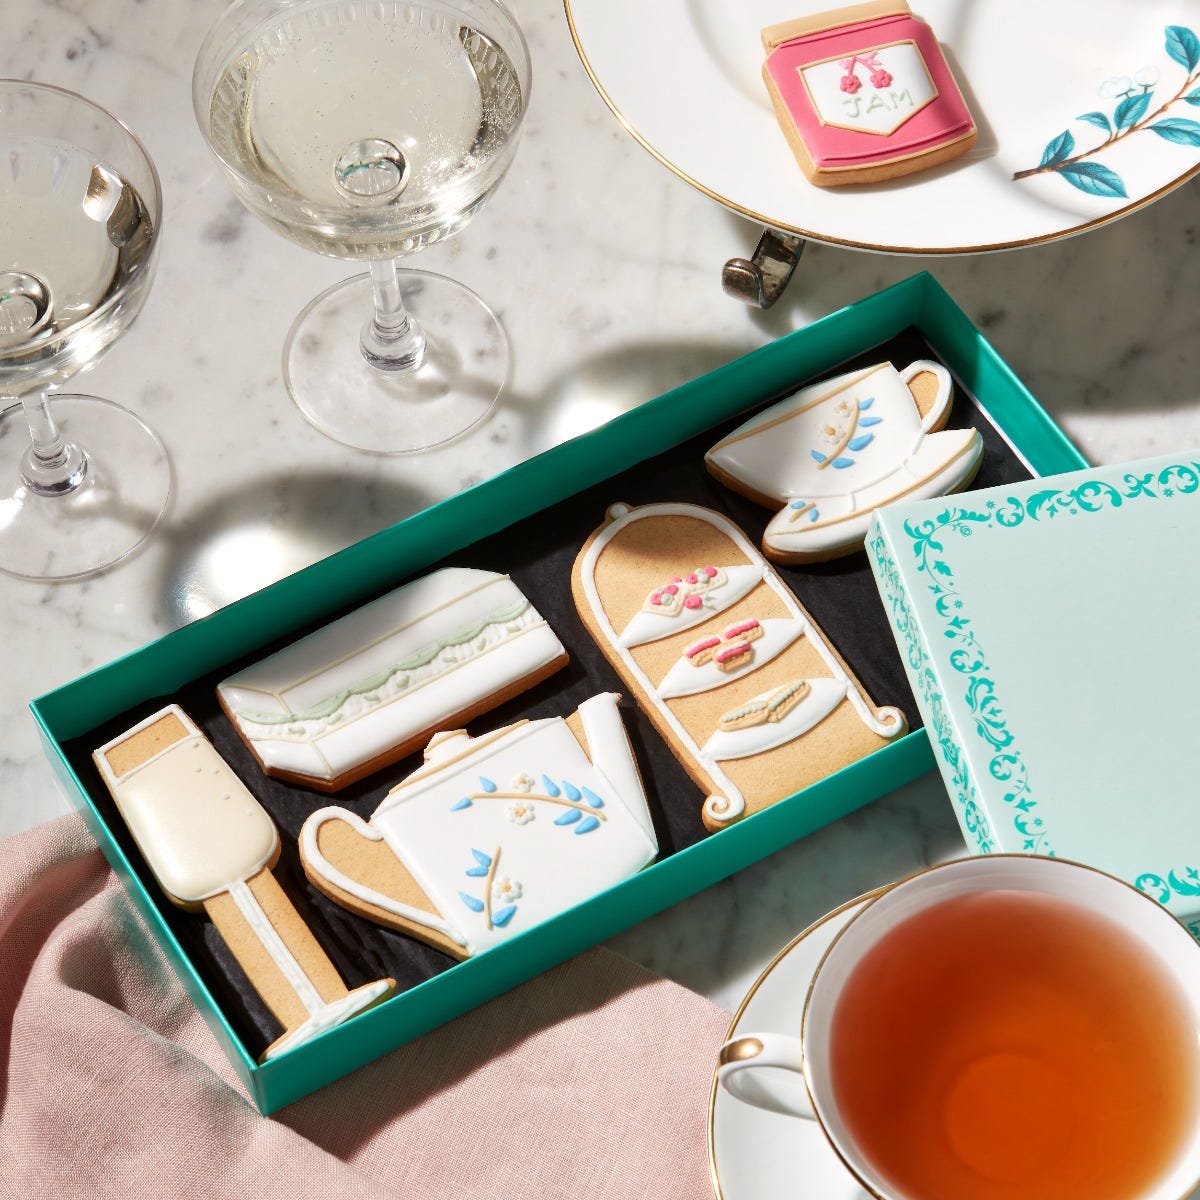 Afternoon Tea Iced Biscuits, Fortnum & Mason